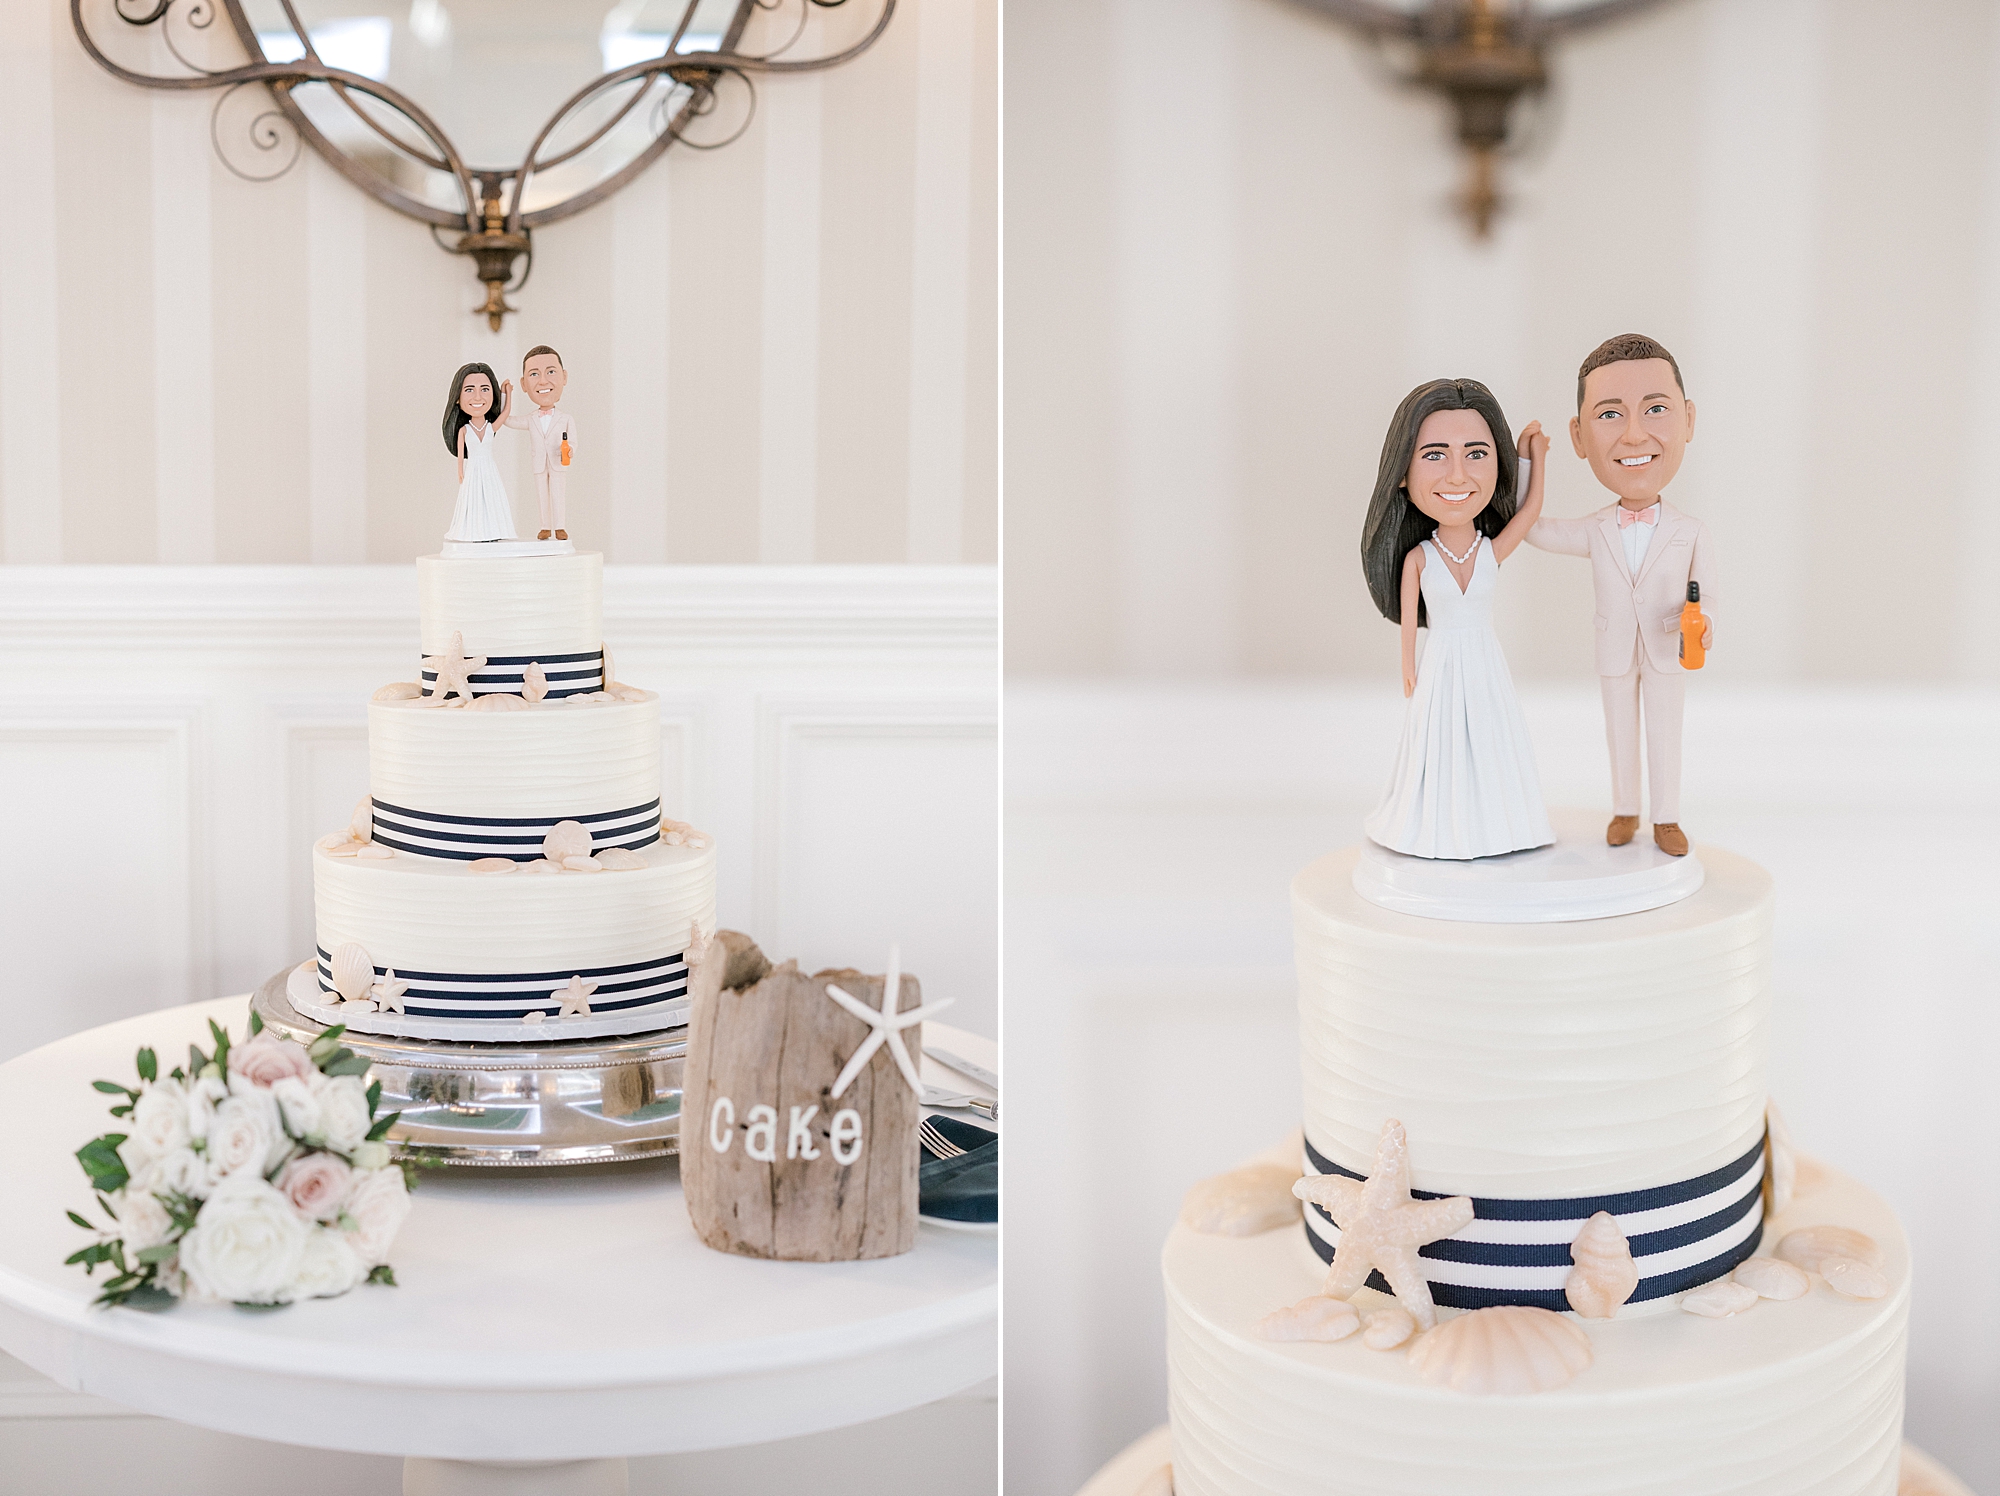 tiered wedding cake with blue ribbons around layers